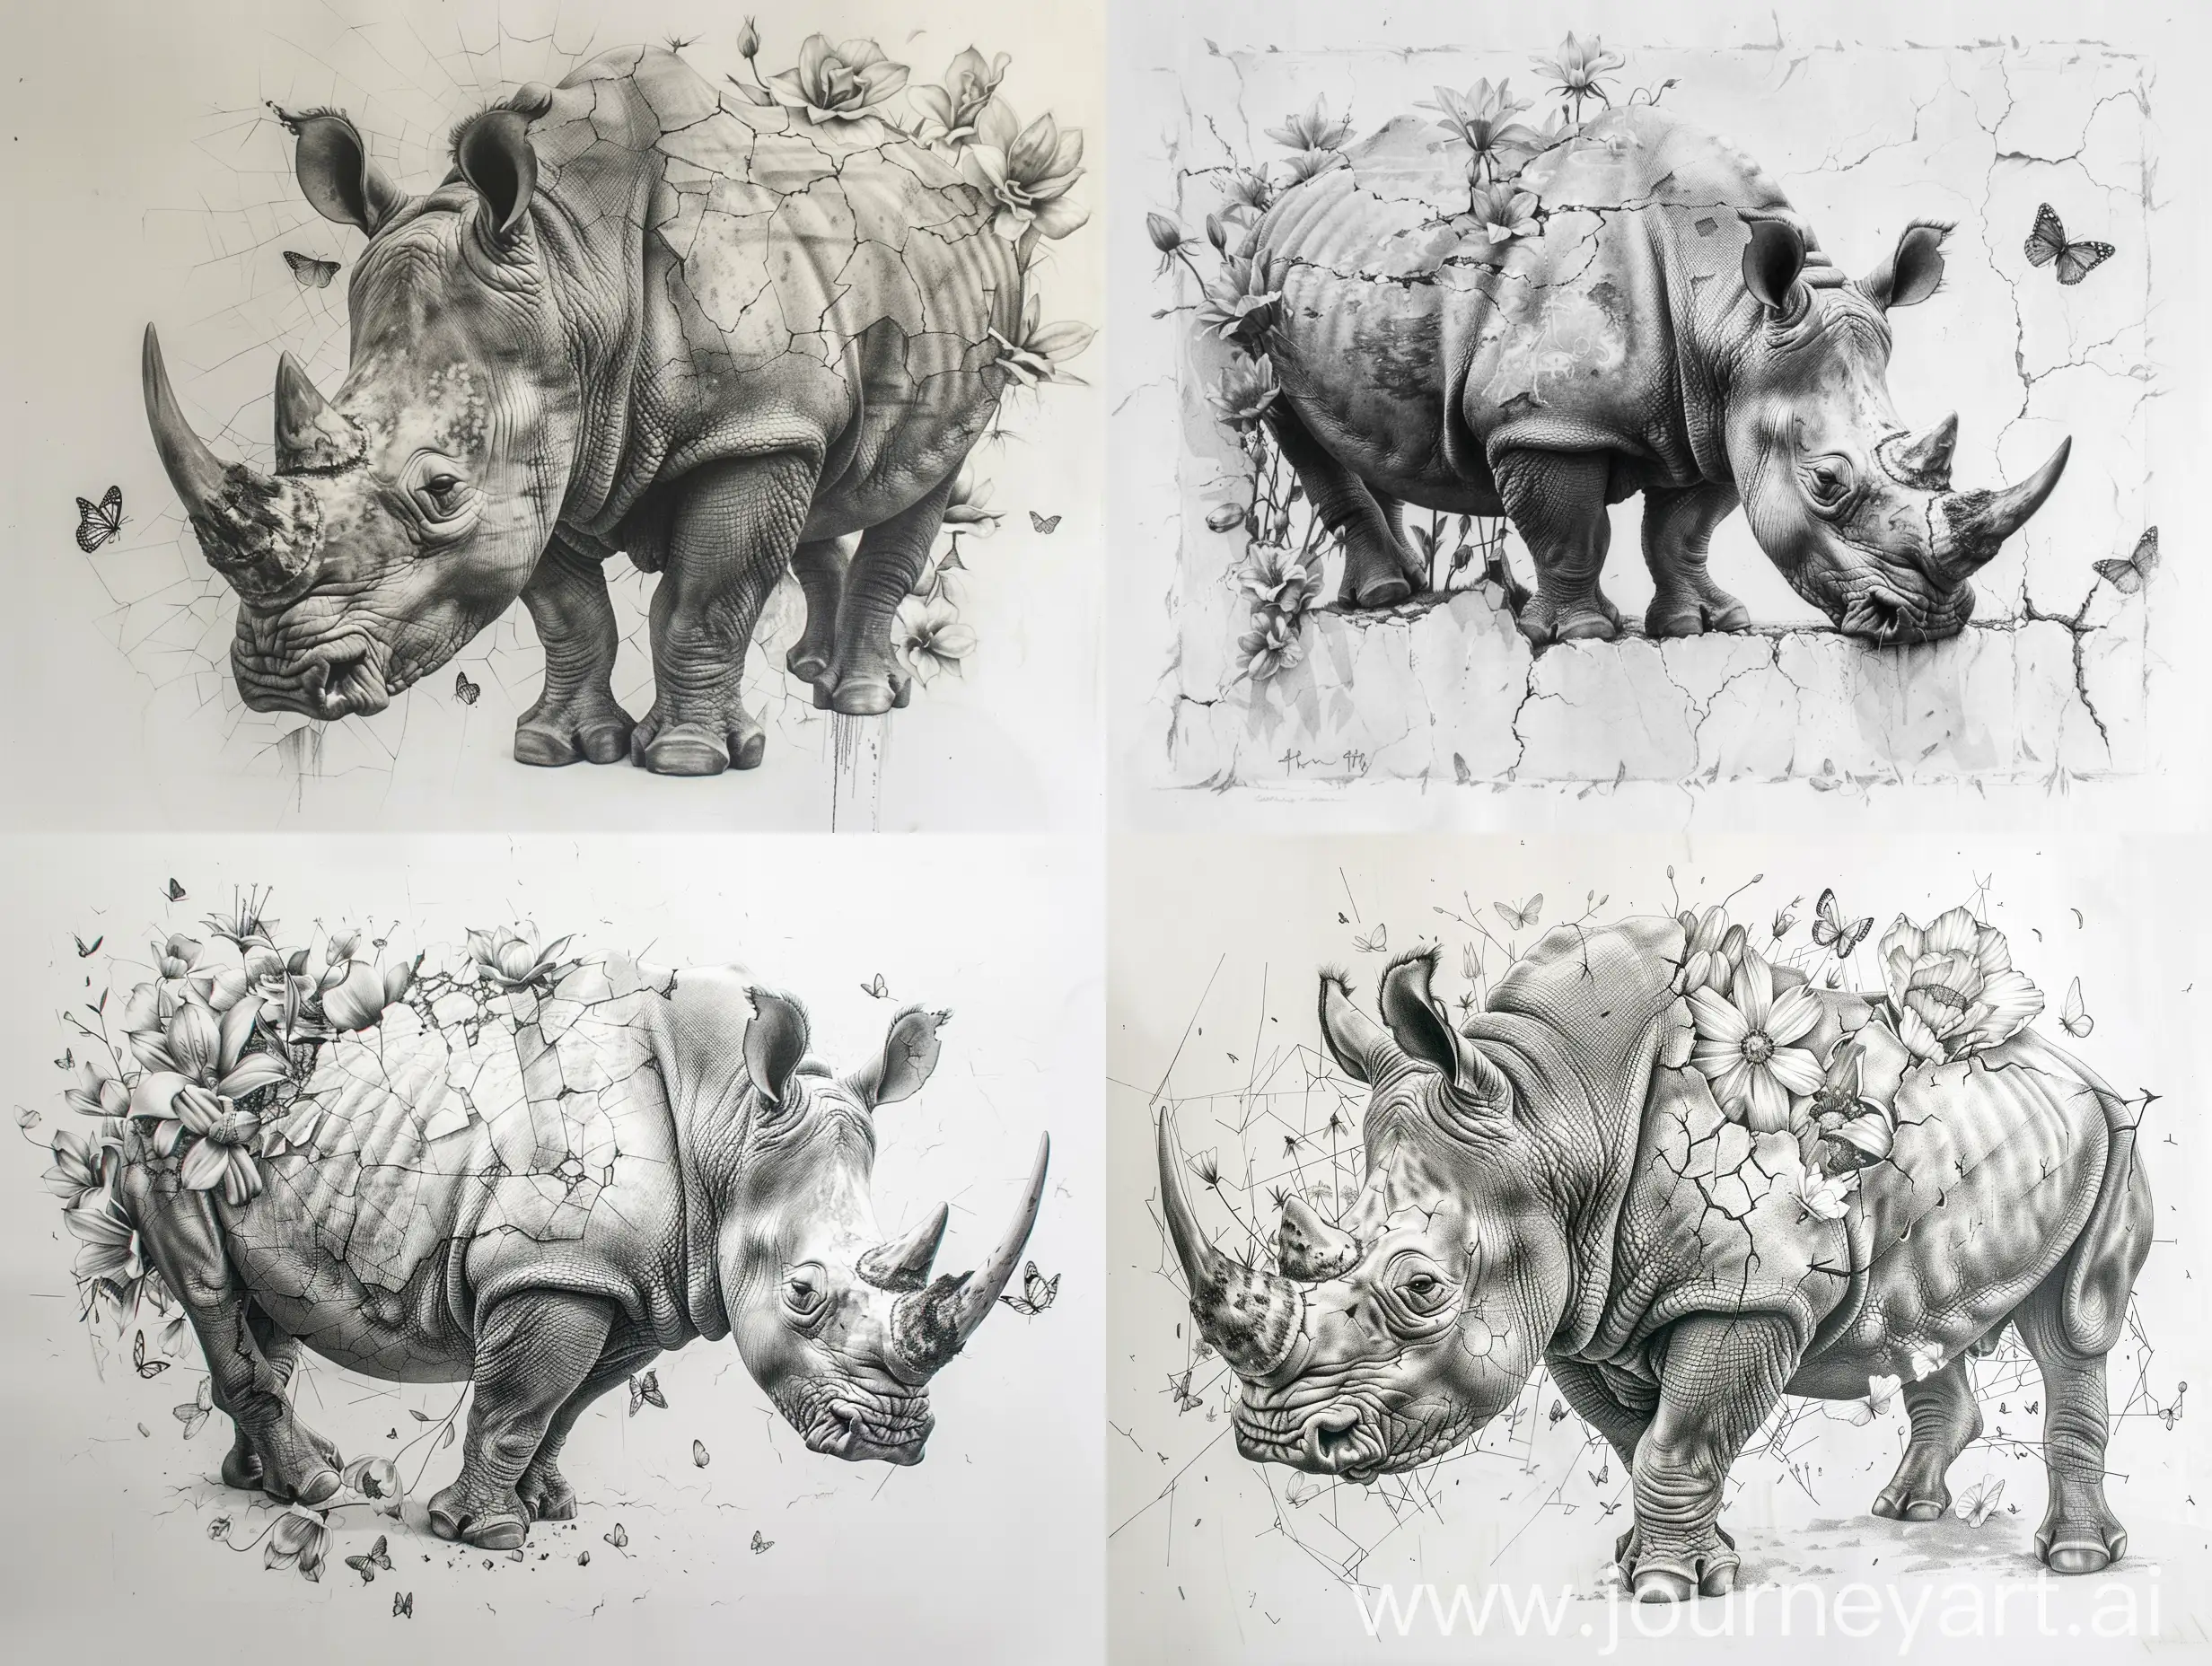 genre creative dark hyper realistic pencil sketch of a rhino on prism like surface, the upper body of the rhino is cracking and from those cracks flowers are growing and butterflies are coming out, on a large canvas in great fine details with white background
